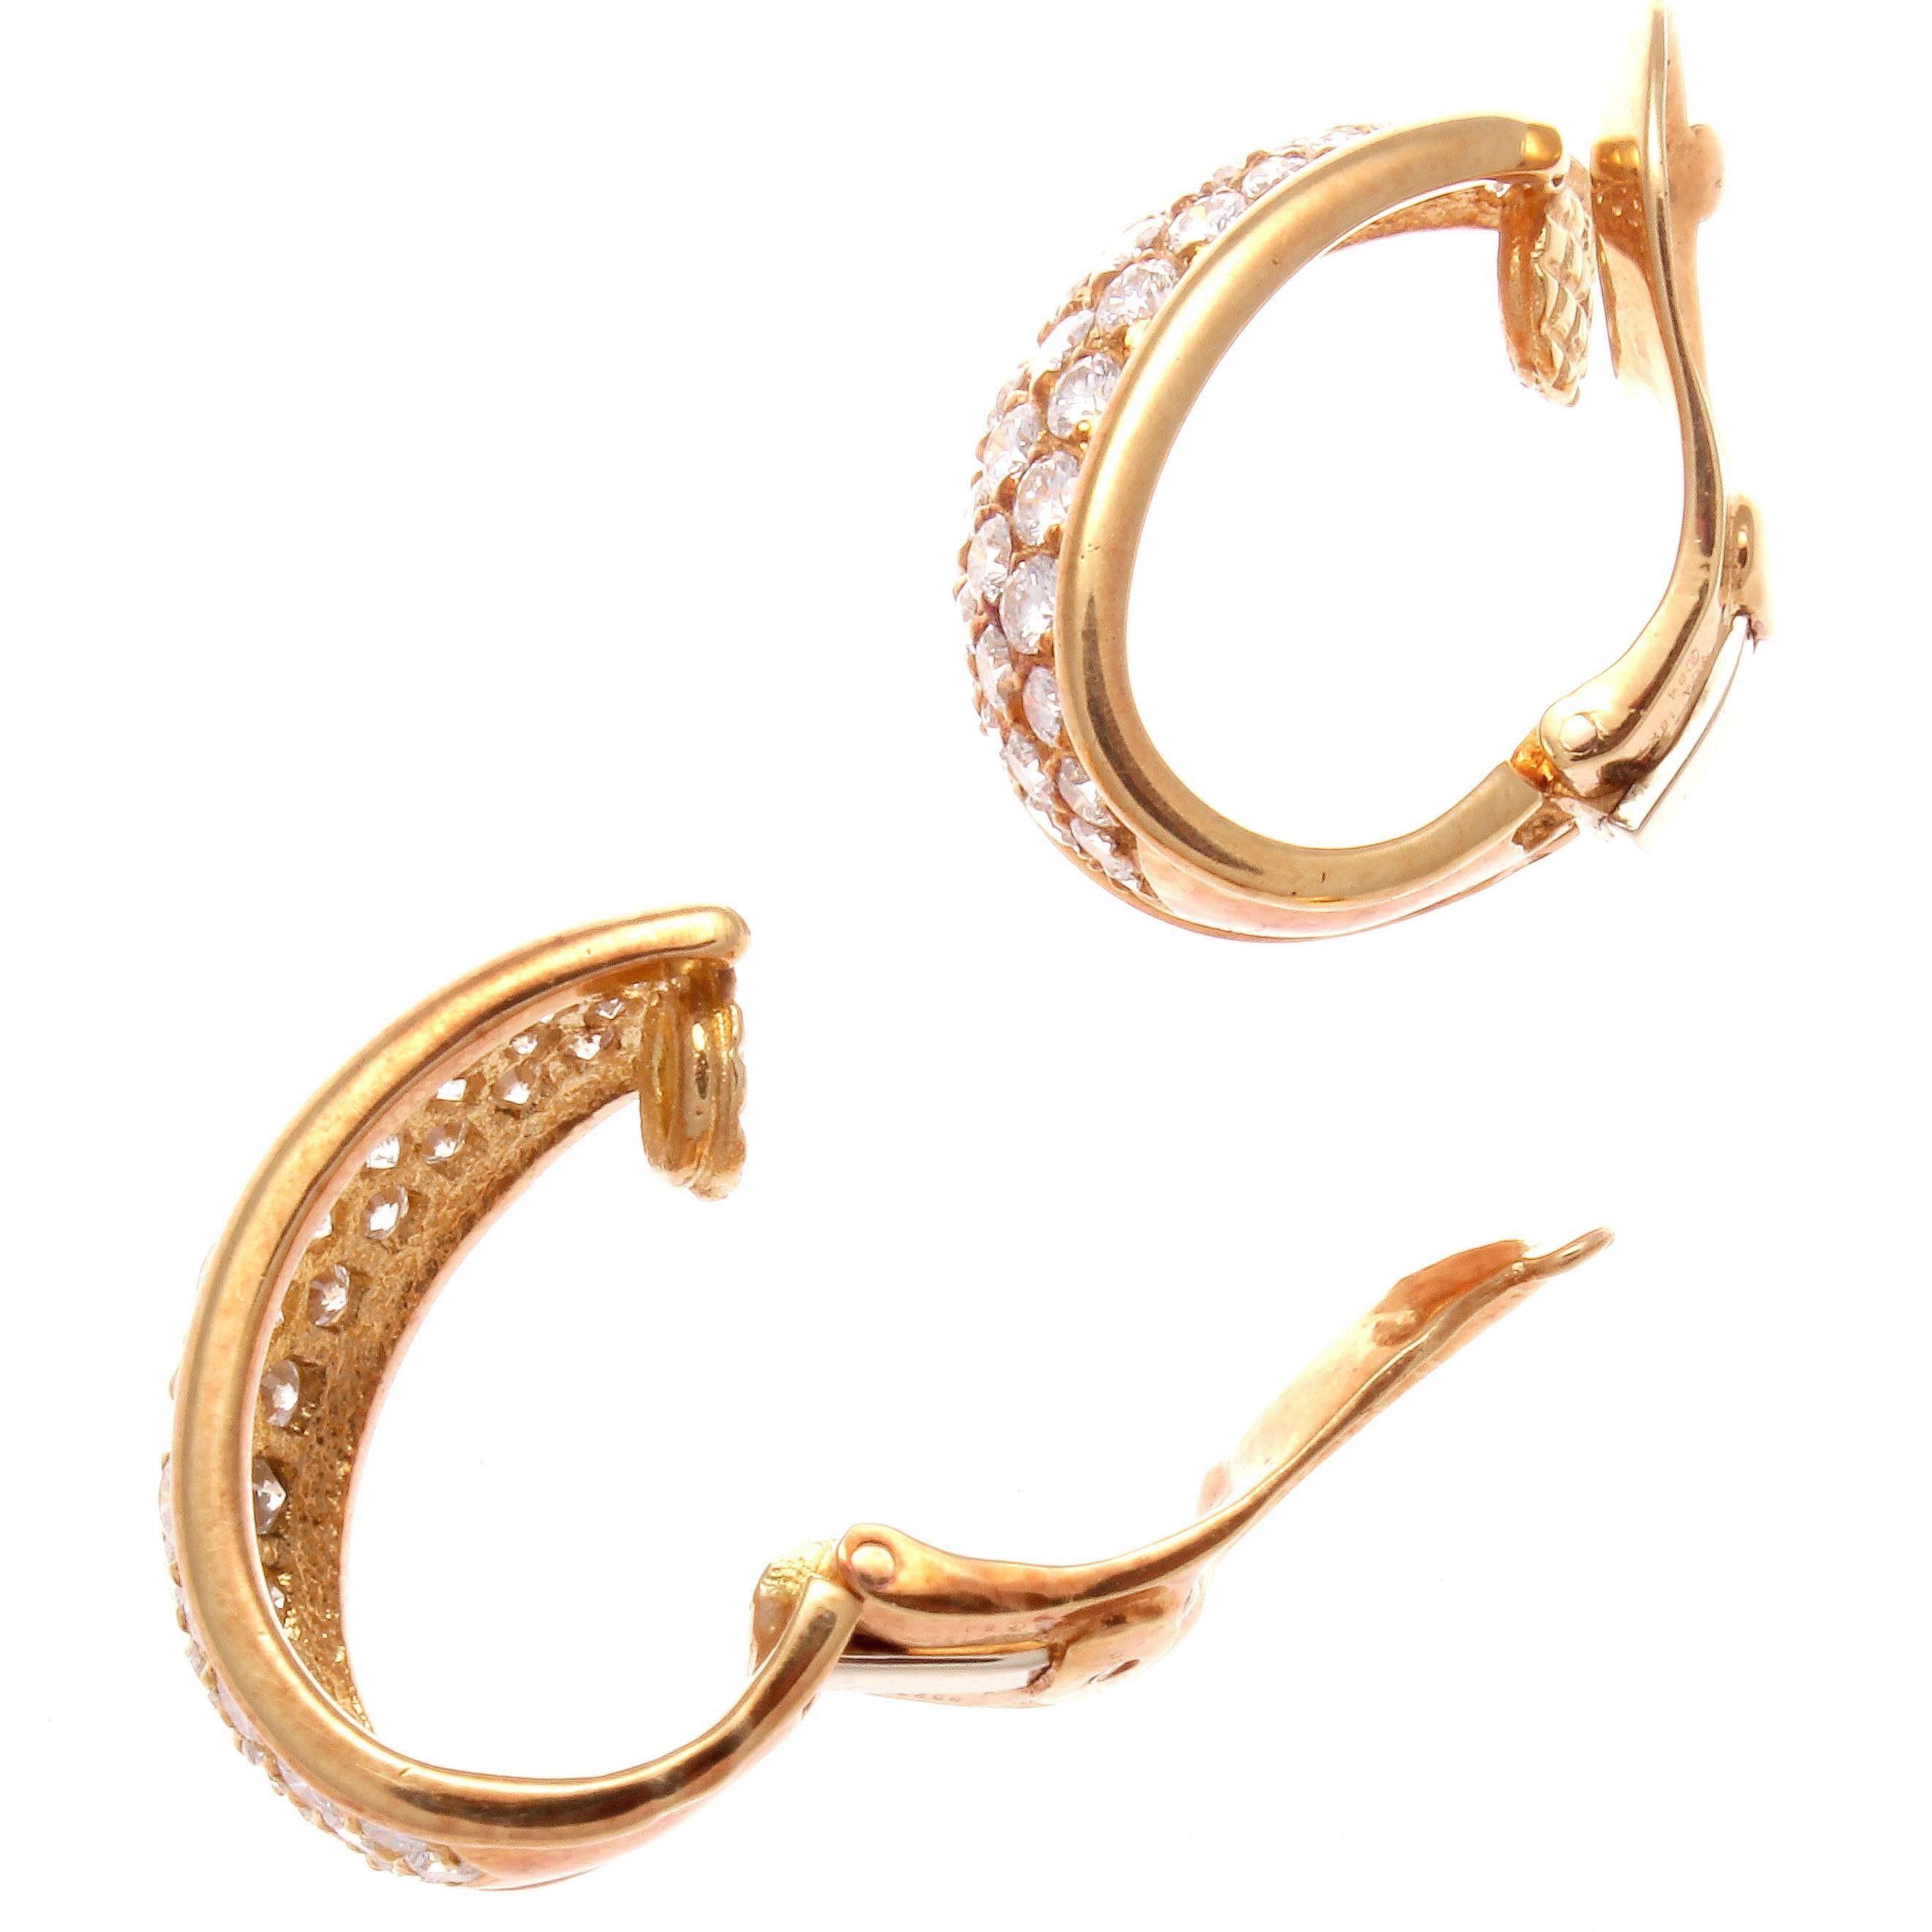 From the beginning to this day classic elegance is always present in the designs of VCA. Featuring colorless diamonds cascading down the smoothly crafted glistening 18k gold hoops. Signed VCA and numbered.